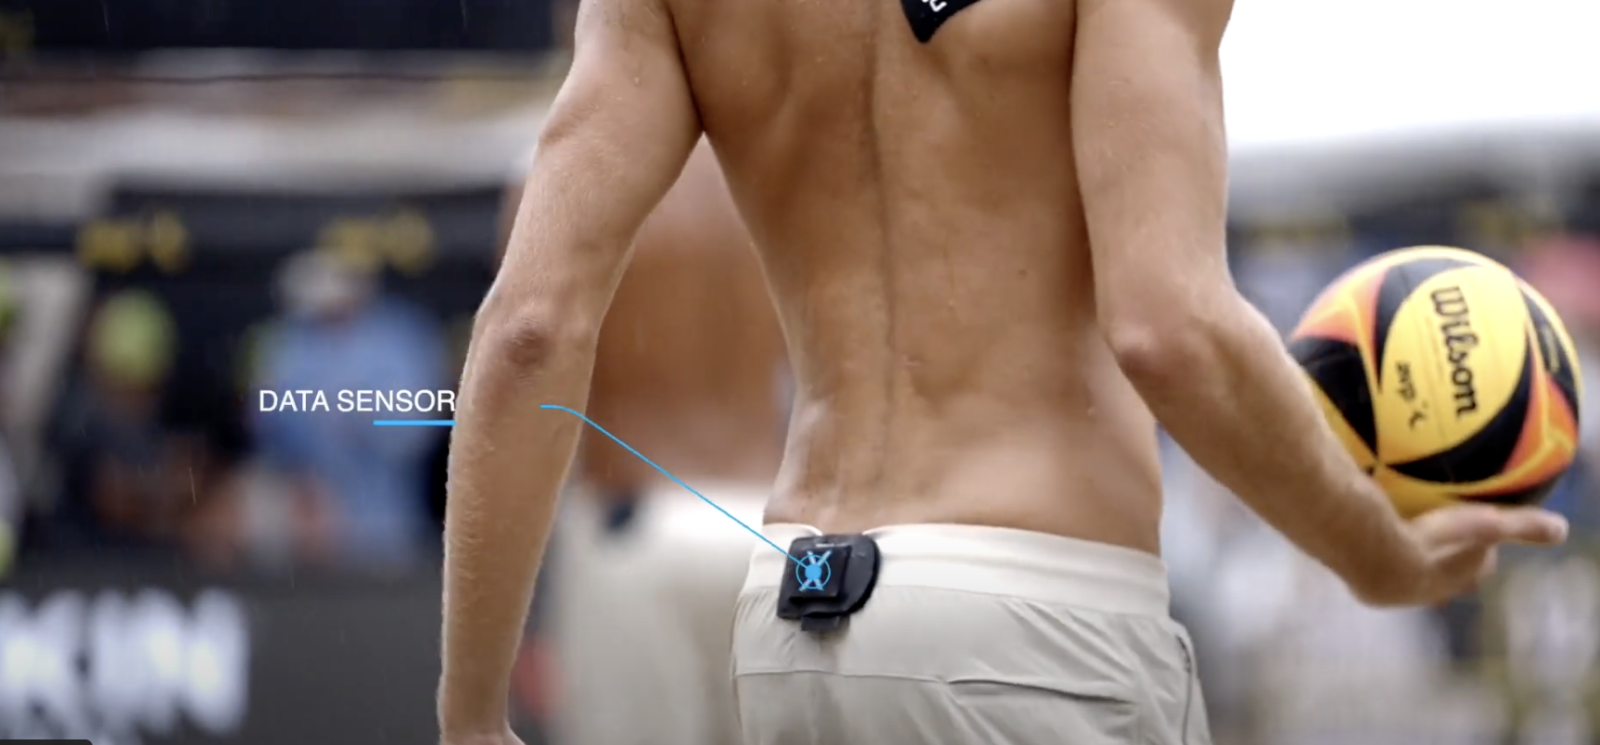 Even beach volleyball players are using wearables to collect sports data during matches.